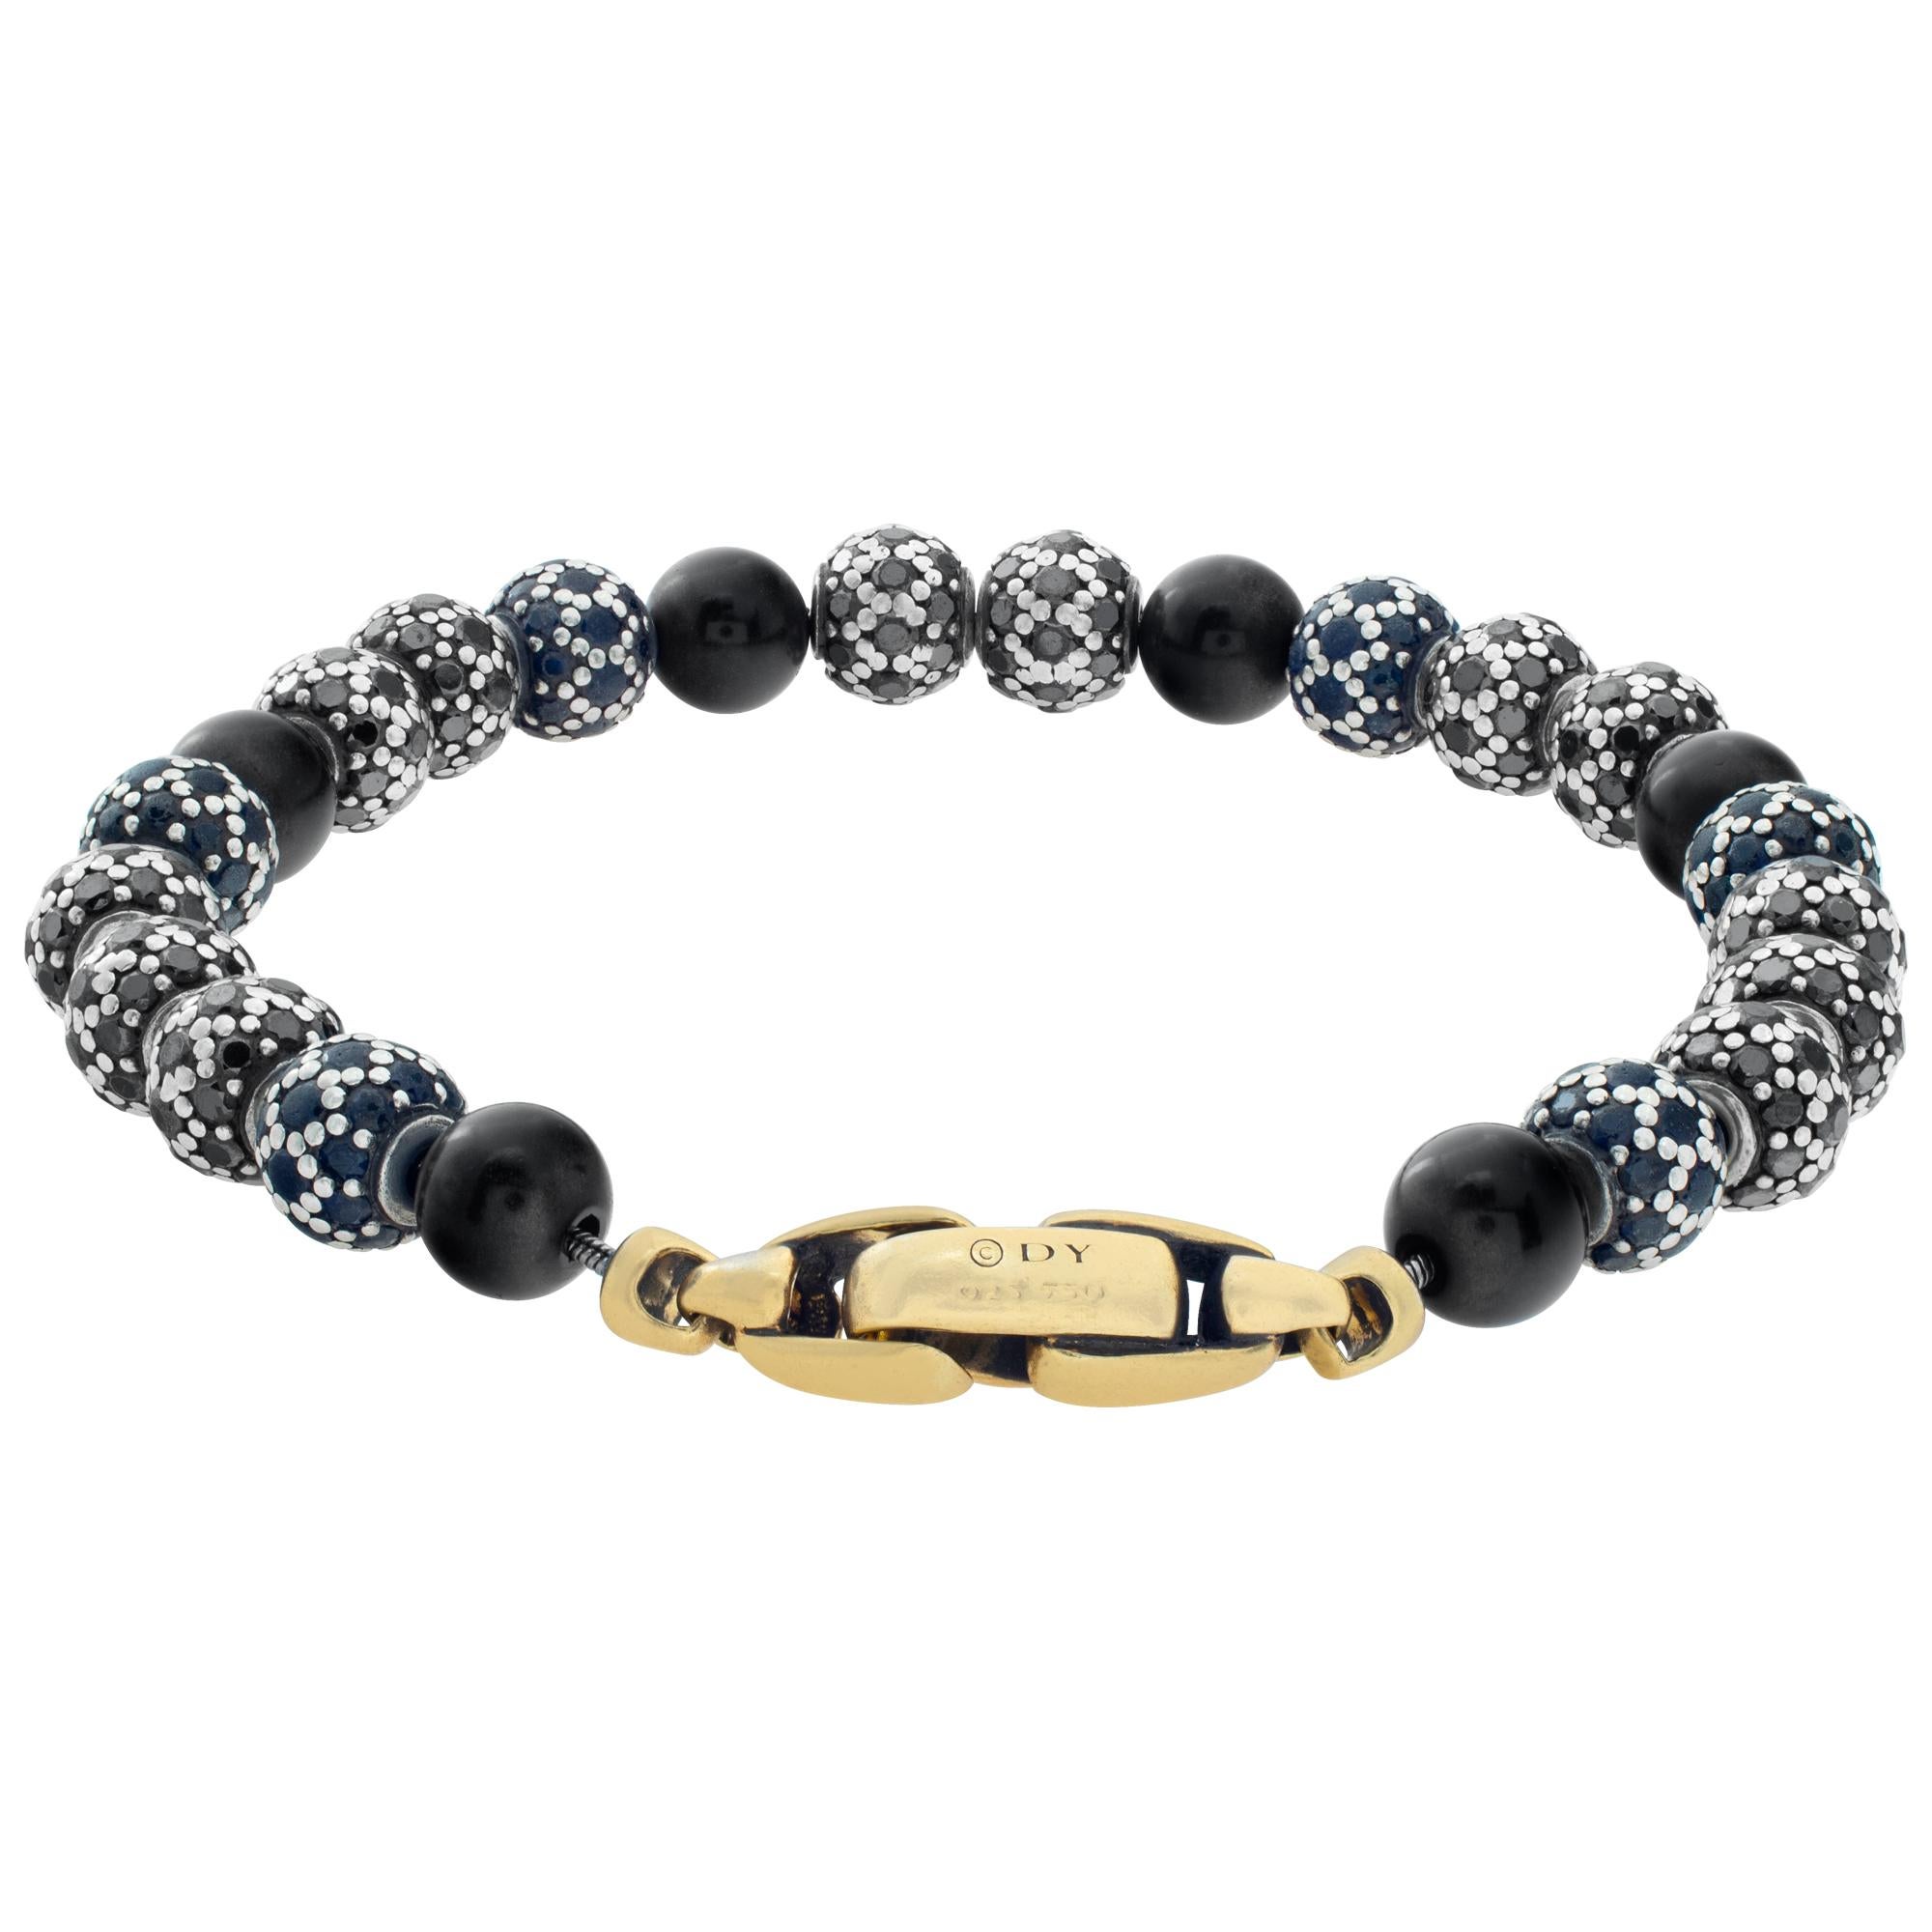 David Yurman Spiritual Bead onyx and diamond 18k gold bracelet In Excellent Condition For Sale In Surfside, FL